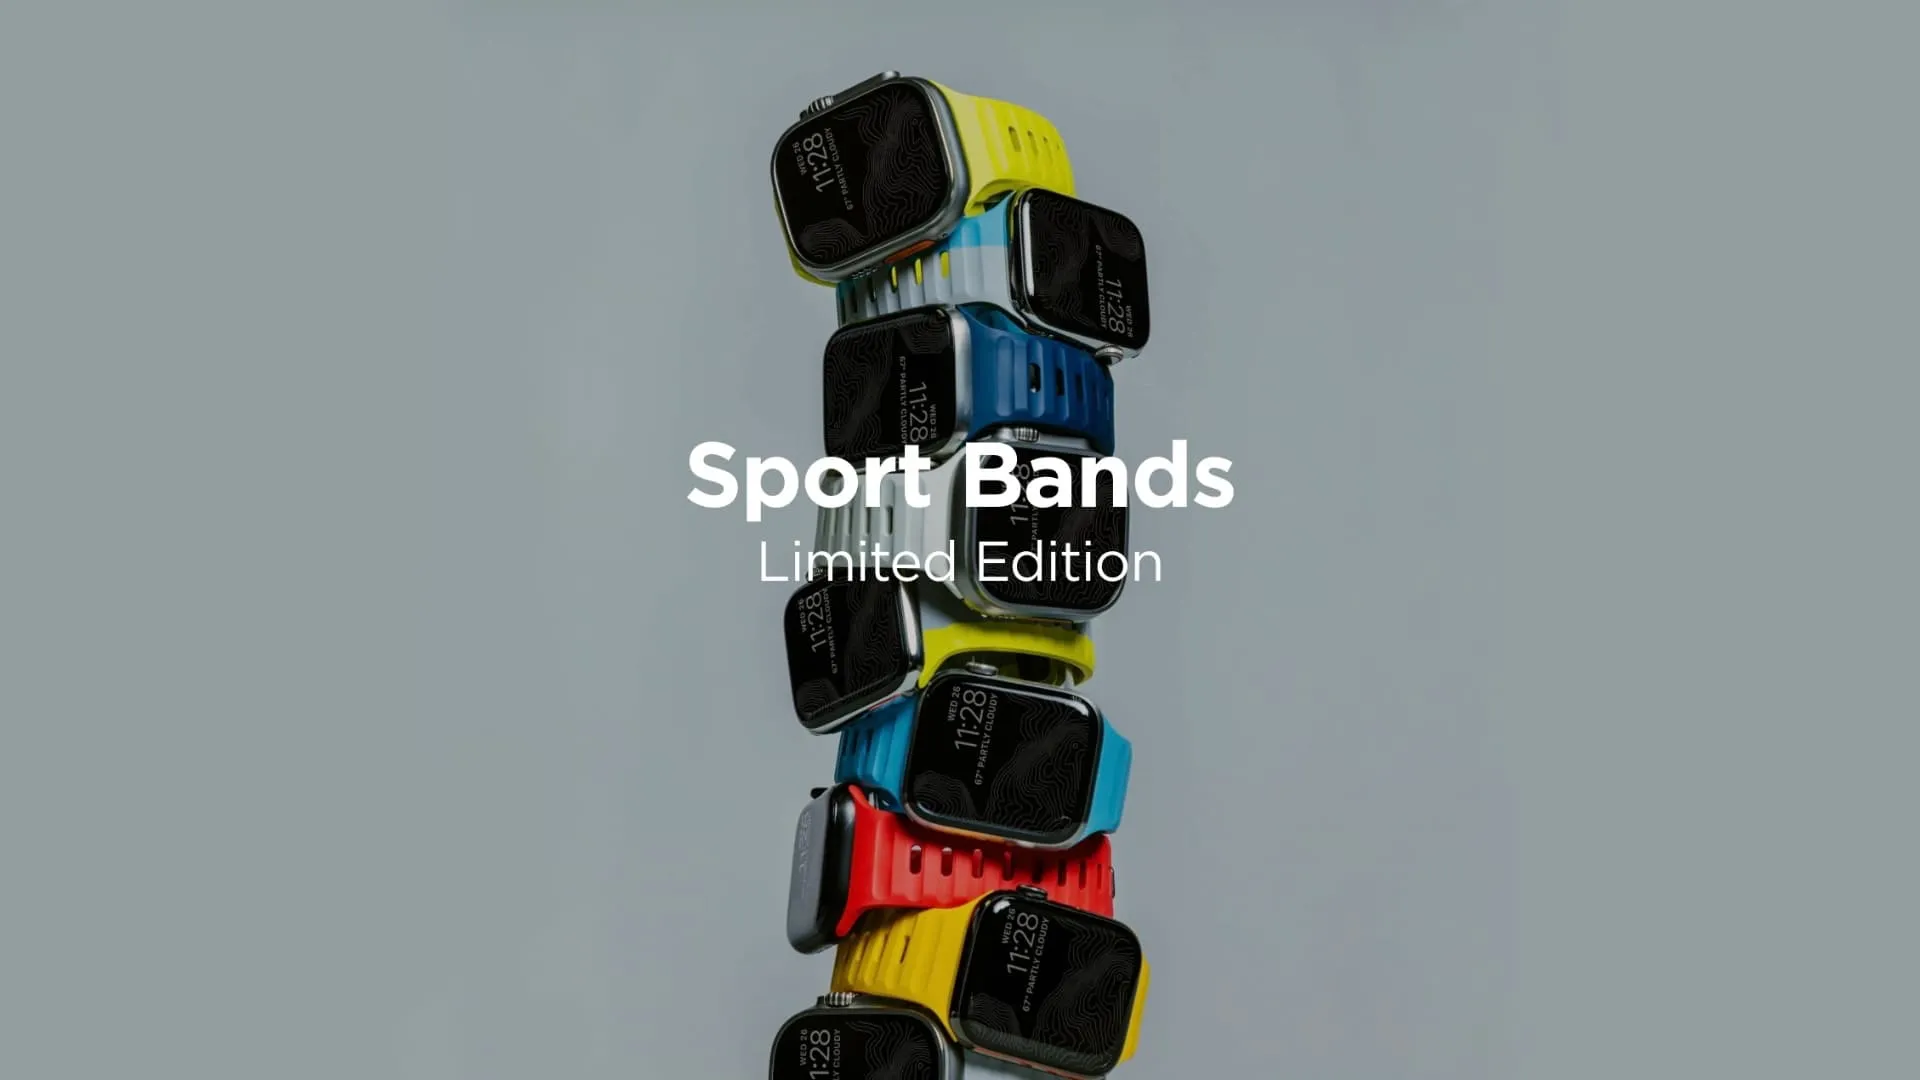 Nomad Limited Edition Apple Watch Sport Bands.